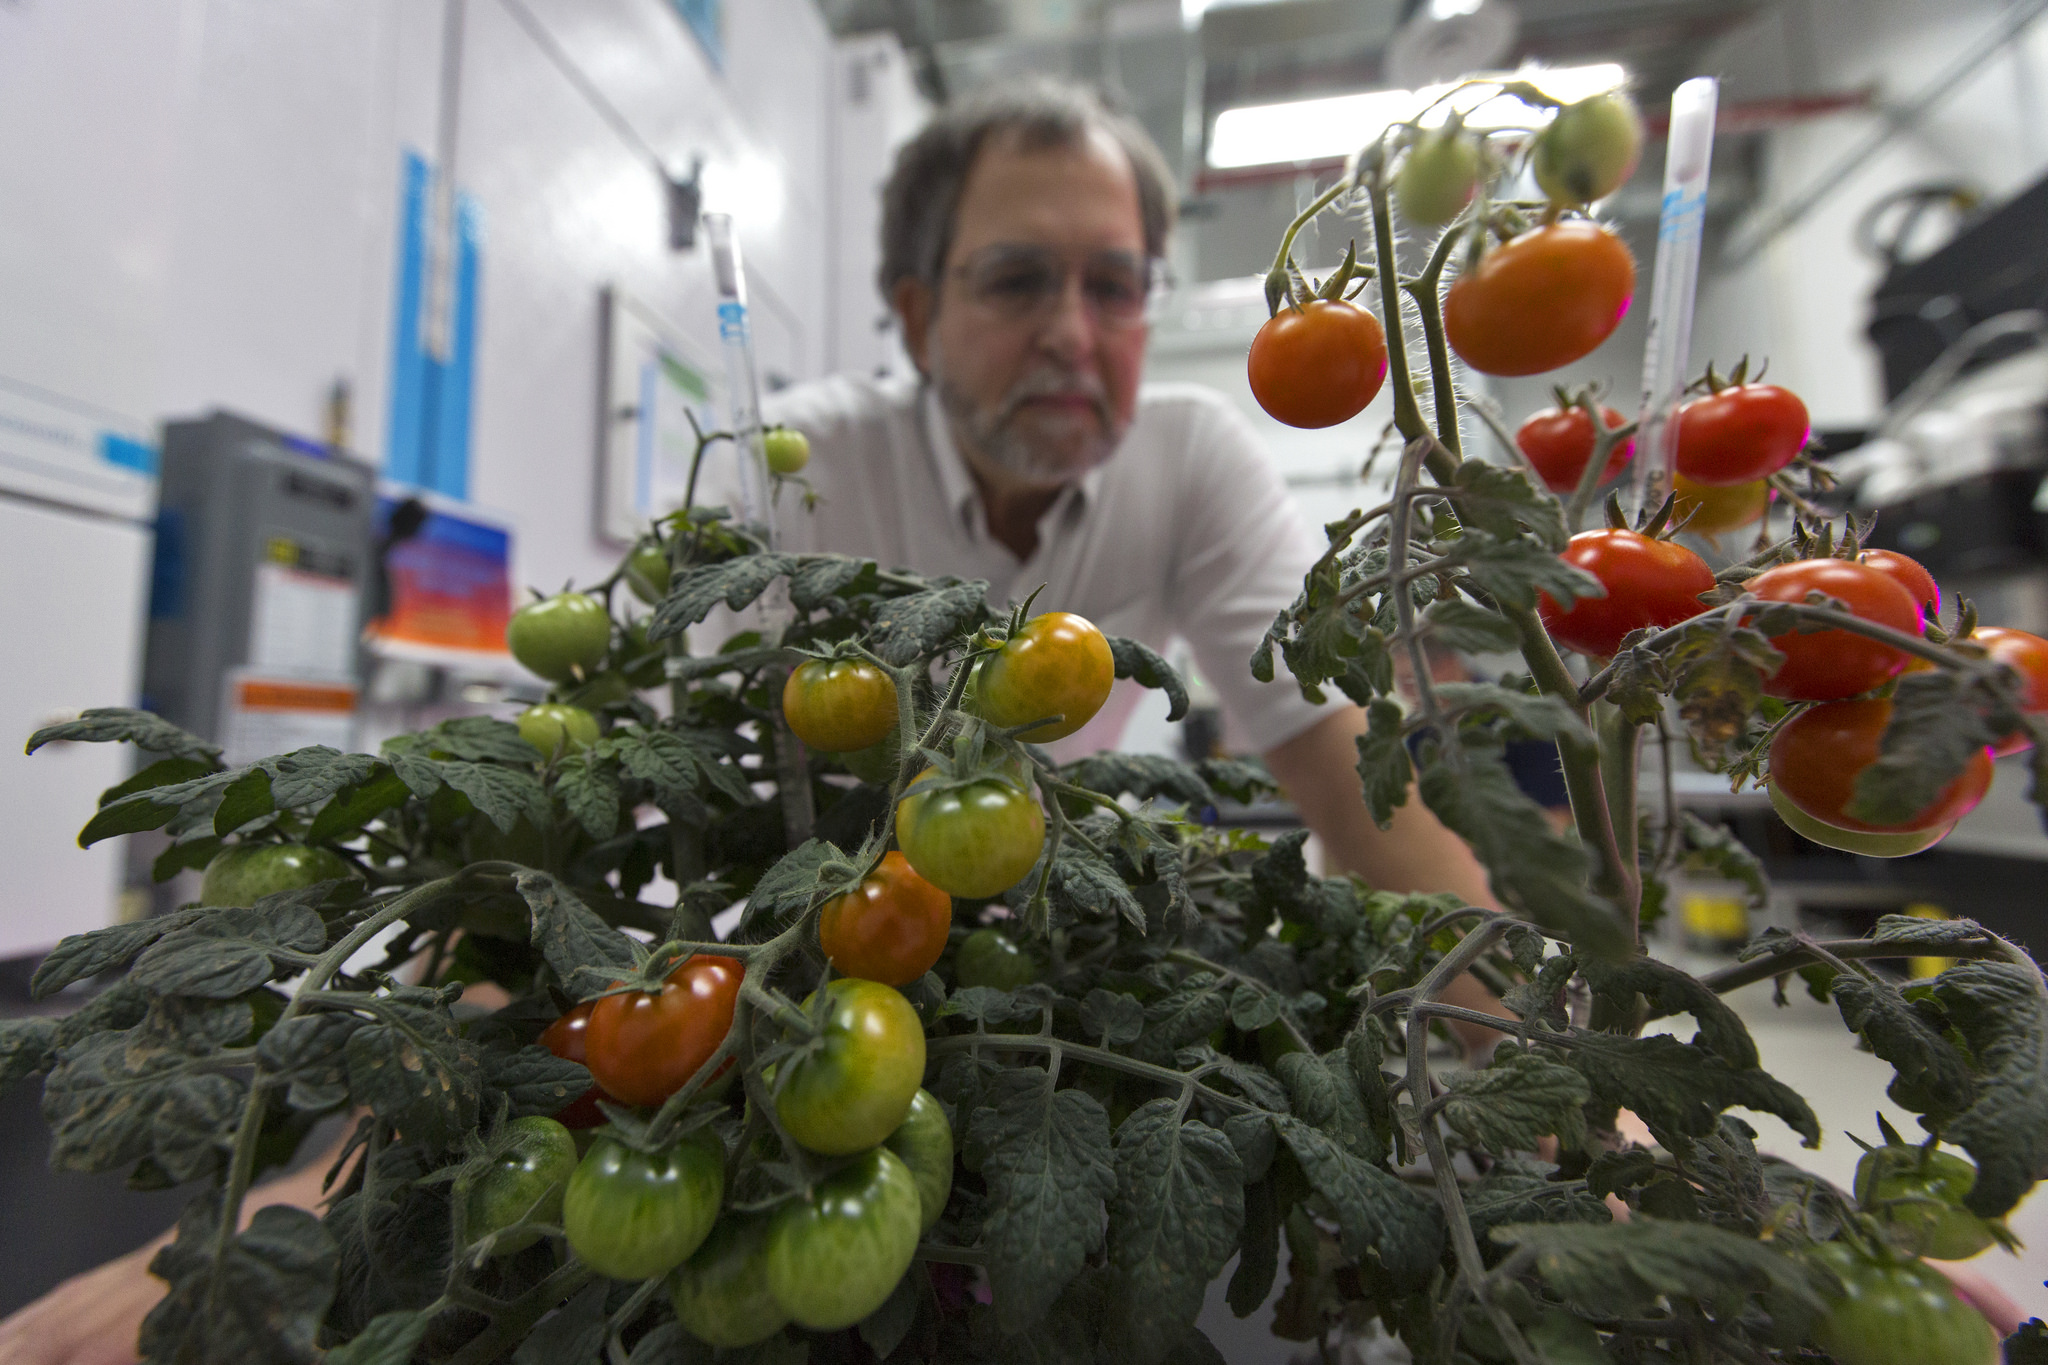 Watering space plants is hard, but NASA has a plan